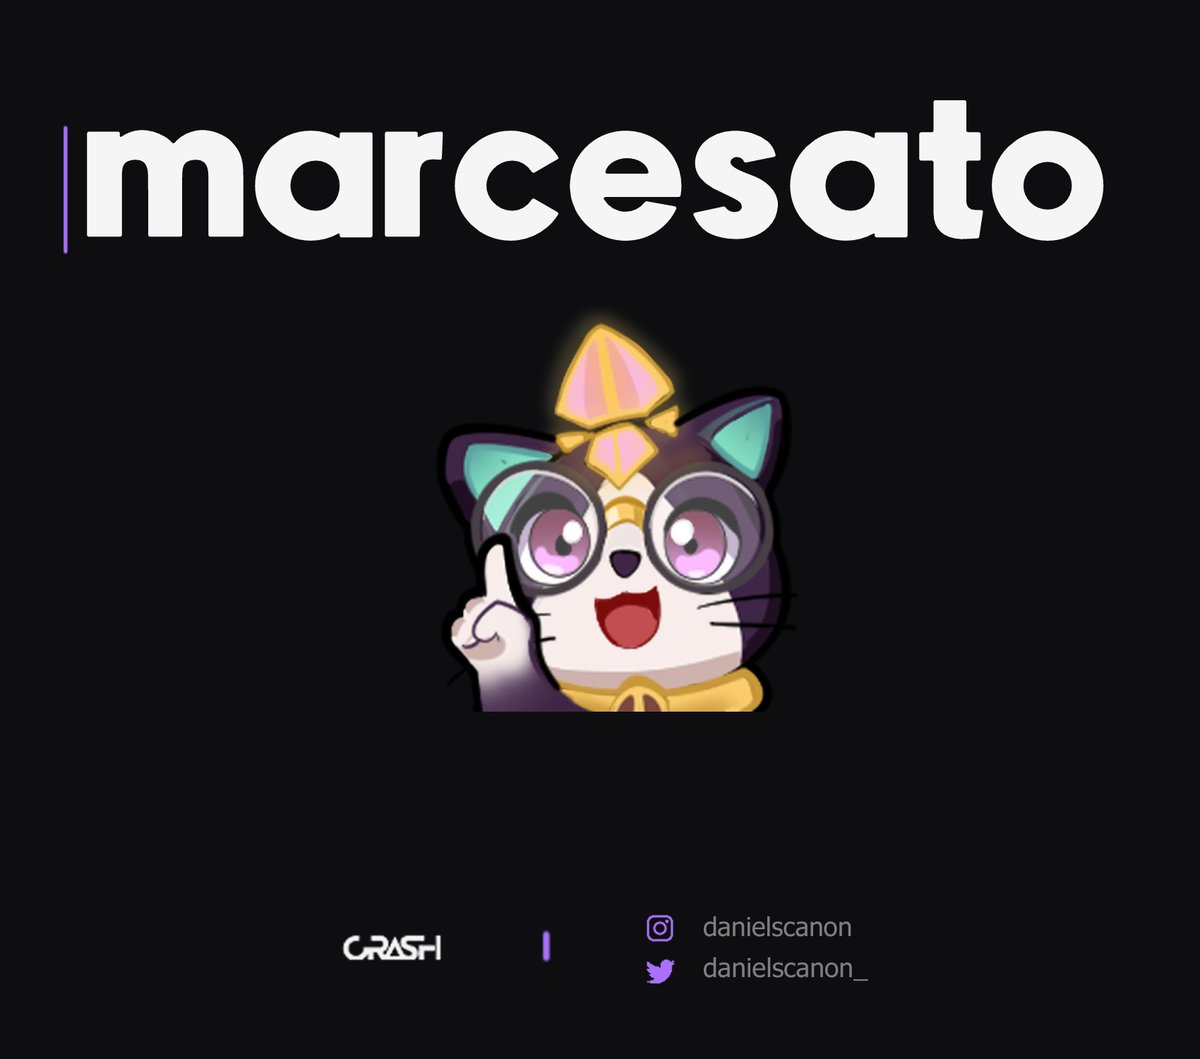 Emote for
Twitch 
#Commission #commissionsopen #twitch #twitchstream #twitchstreamer #emote #comisiones #banner #Layout #bagdesign